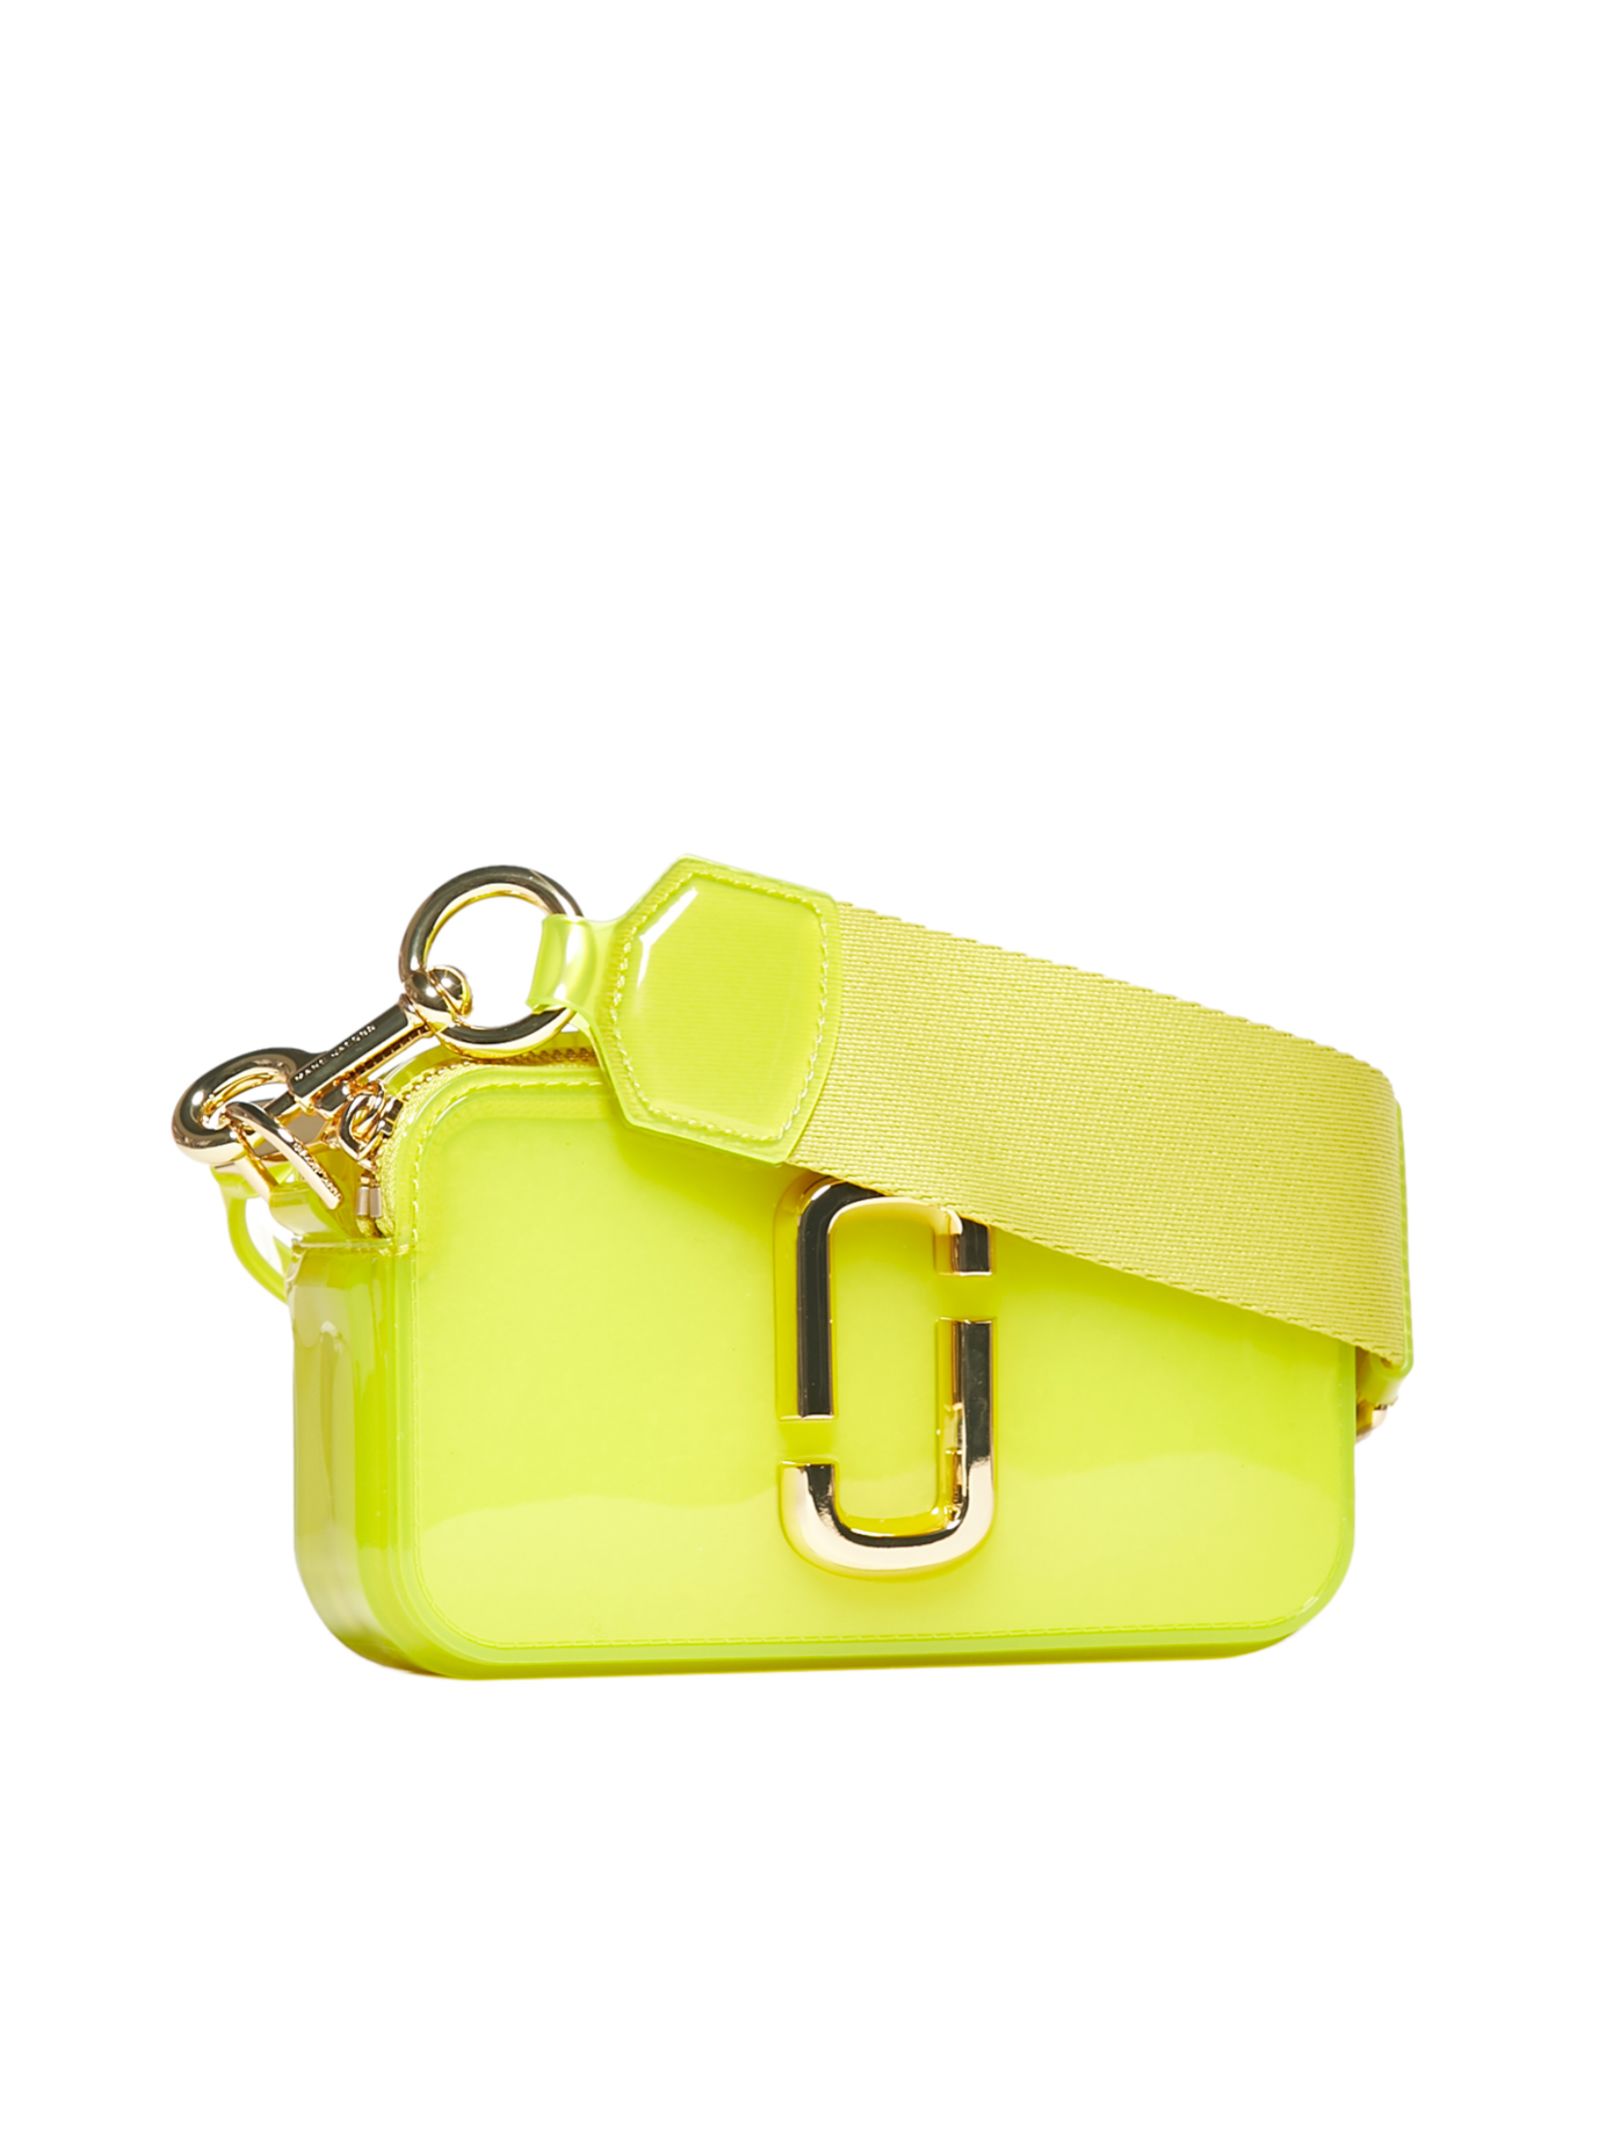 Marc Jacobs Marc Jacobs The Jelly Snapshot Shoulder Bag - Giallo limone - 10872813 | italist